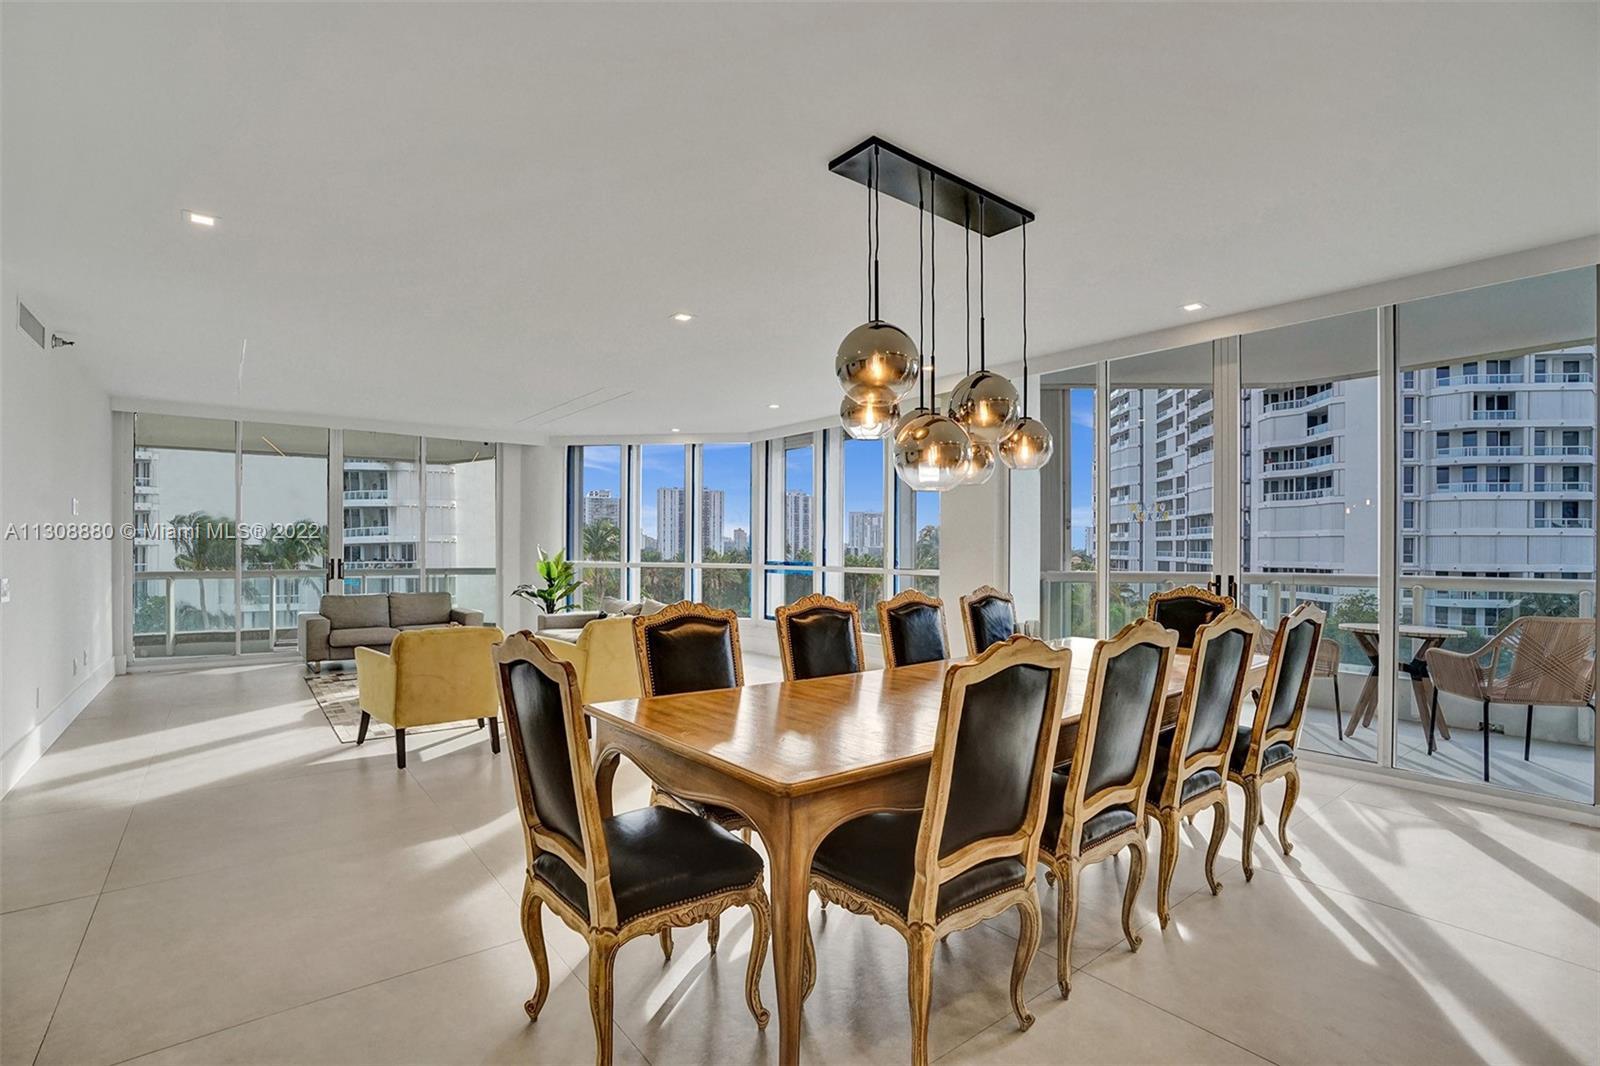 THIS 2BR/2.5 BA PLUS DEN CONDO IS LOCATED IN THE HEART OF AVENTURA.COMPLETELY RENOVATED.IN ADDITION 